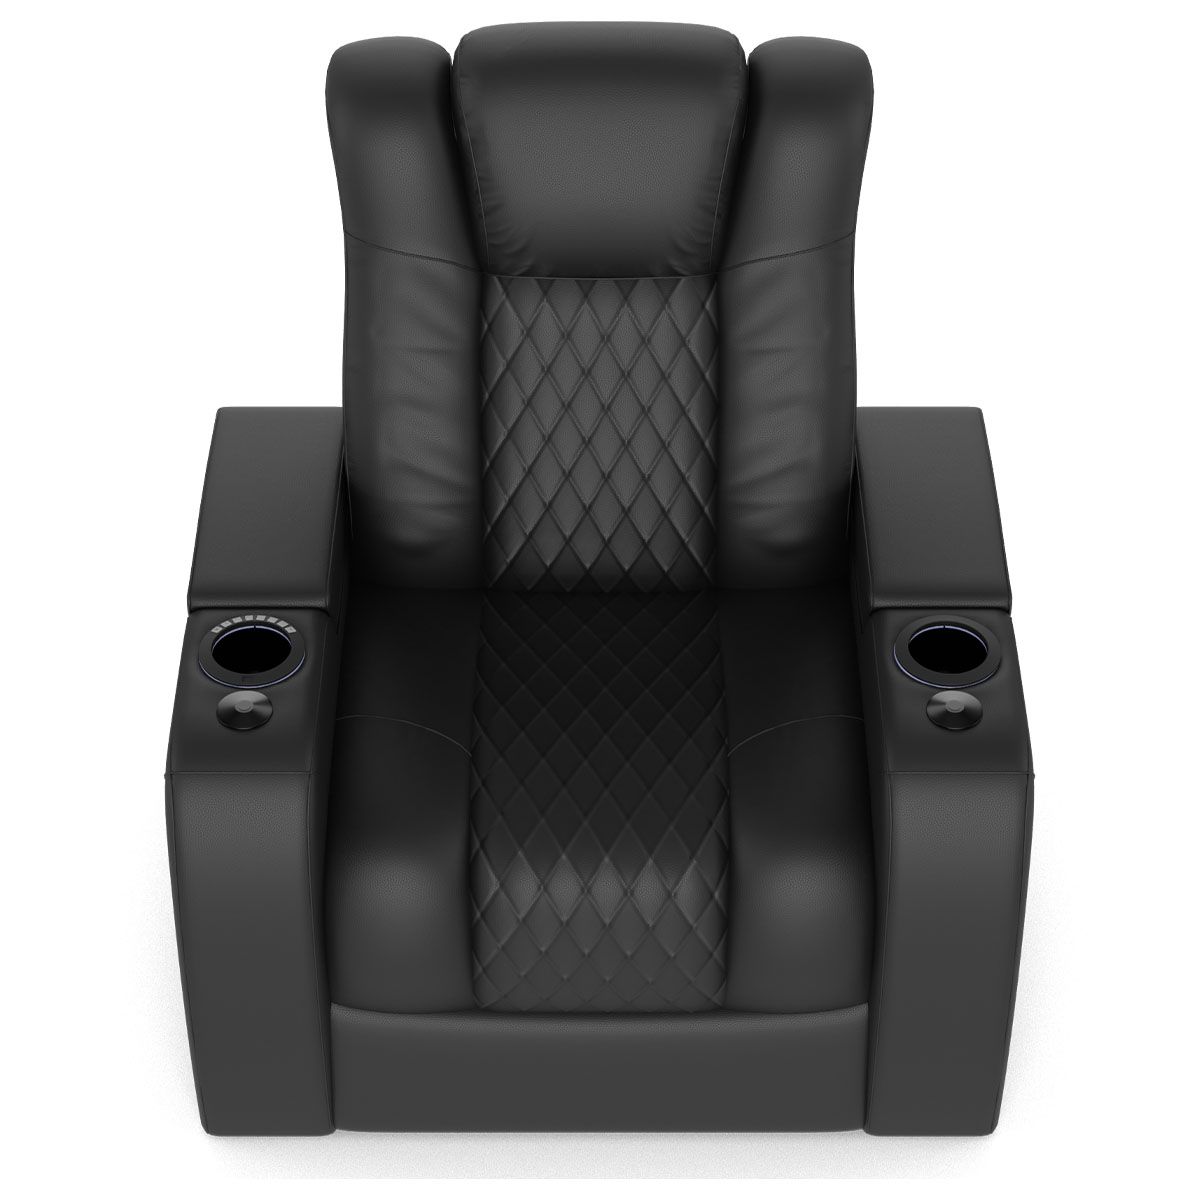 Audio Advice Revelation Home Theater Seating - top down view of 2 arm chair with LEDs on